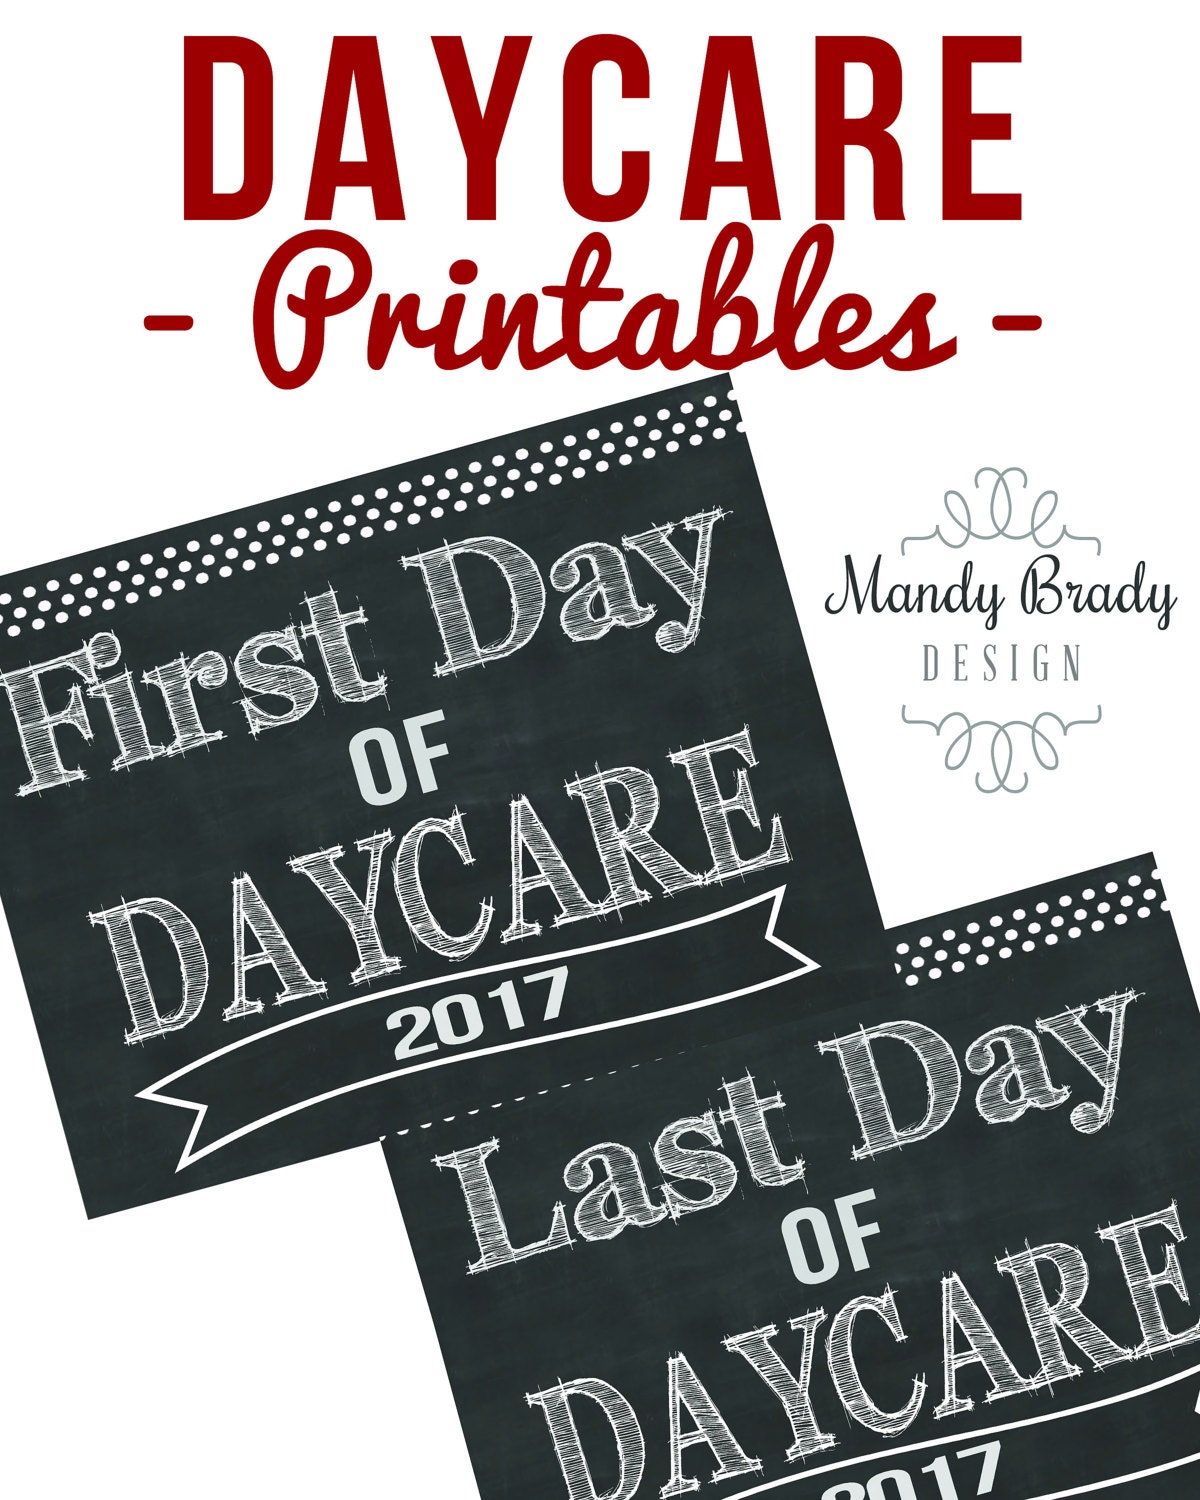 First Day of Daycare Printable Signs Last Day of Day Care